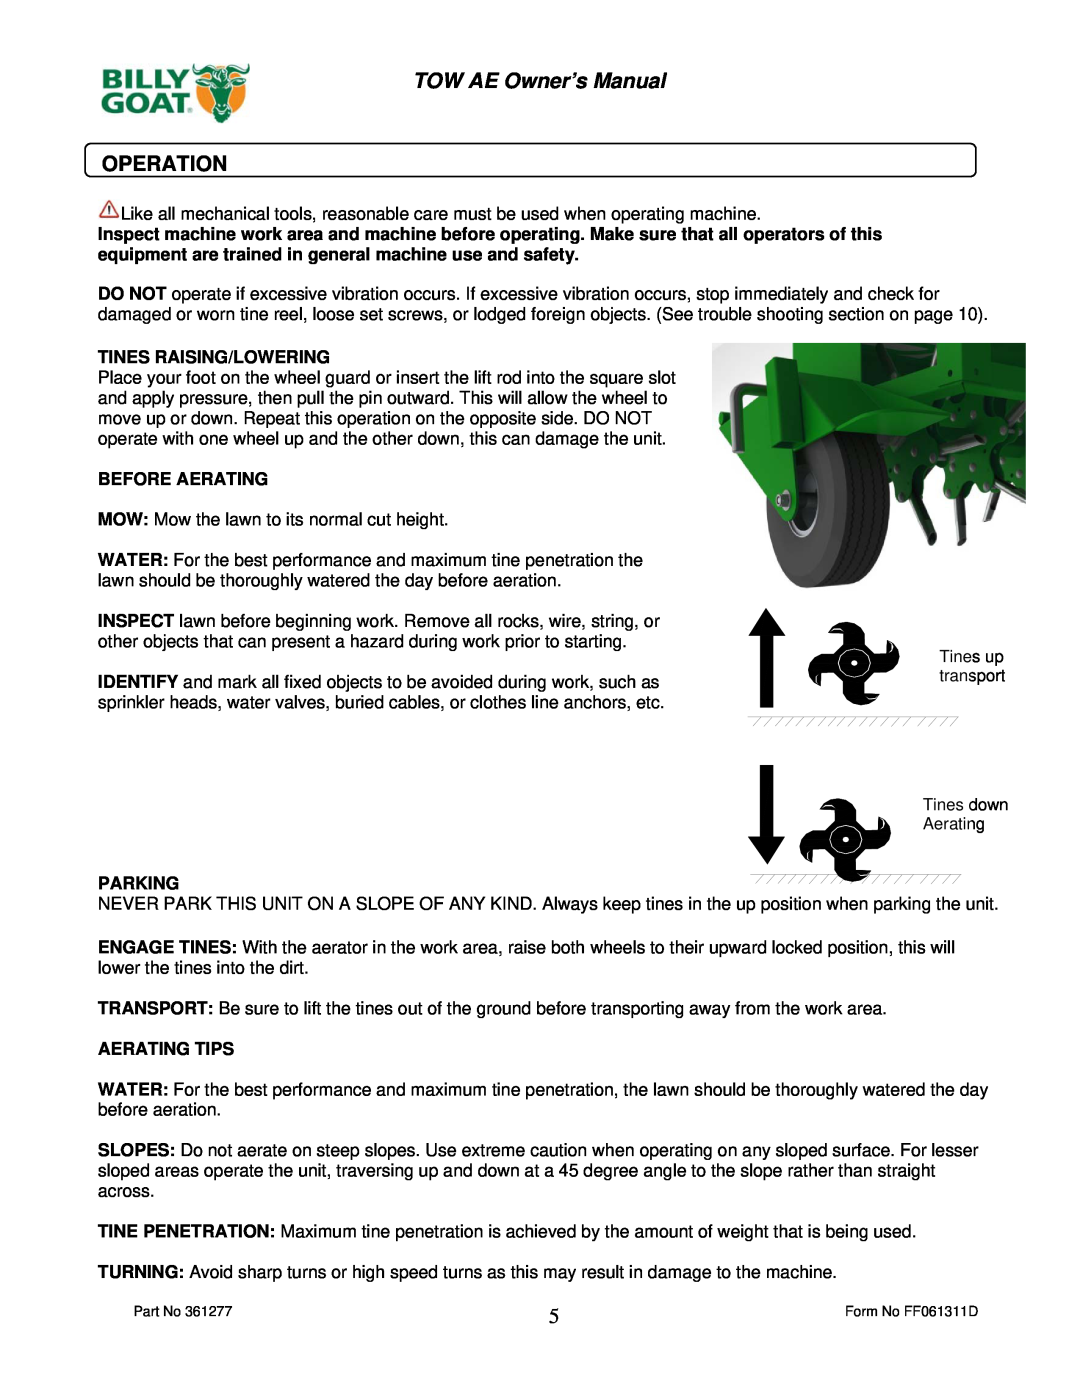 Billy Goat AET48 owner manual Operation, Tines Raising/Lowering, Before Aerating, Parking, Aerating Tips 